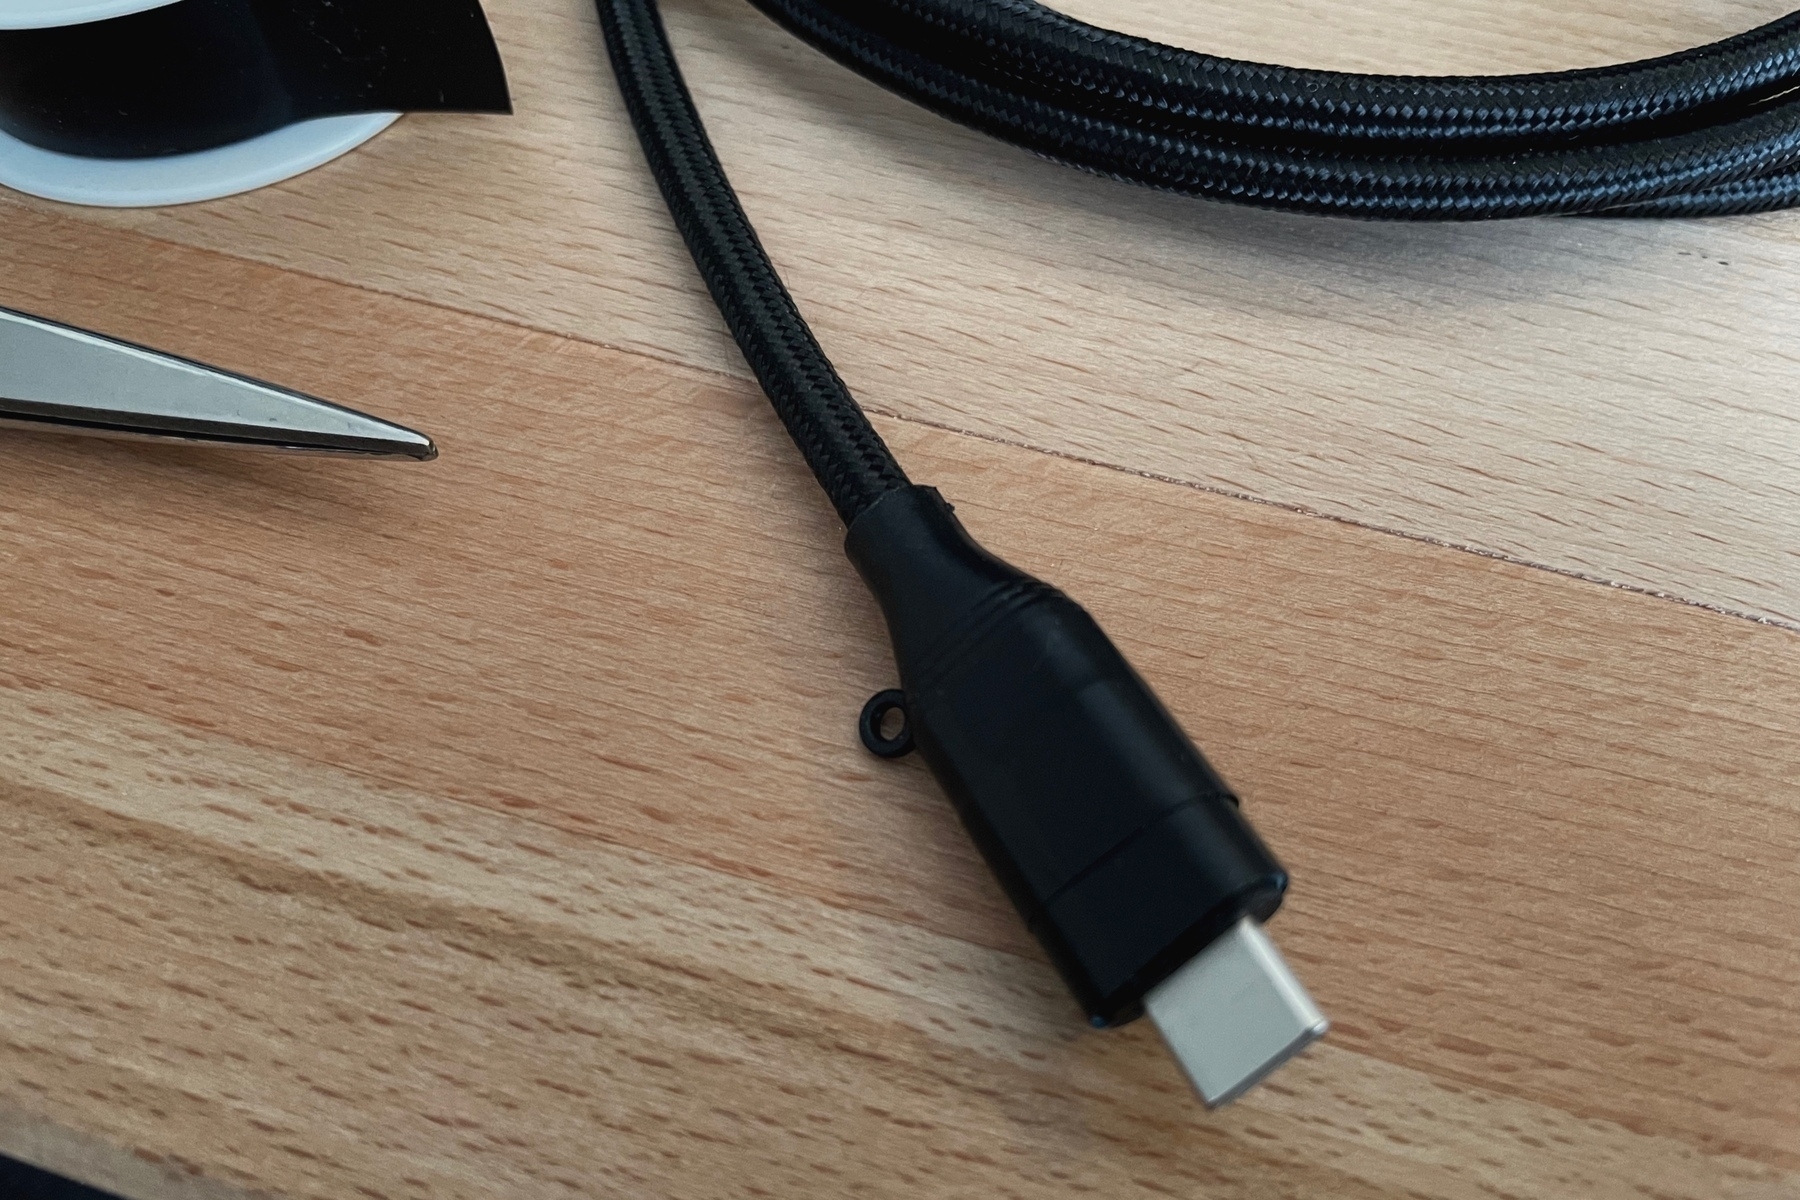 USB-C plug with the ugly color covered with insulating tape